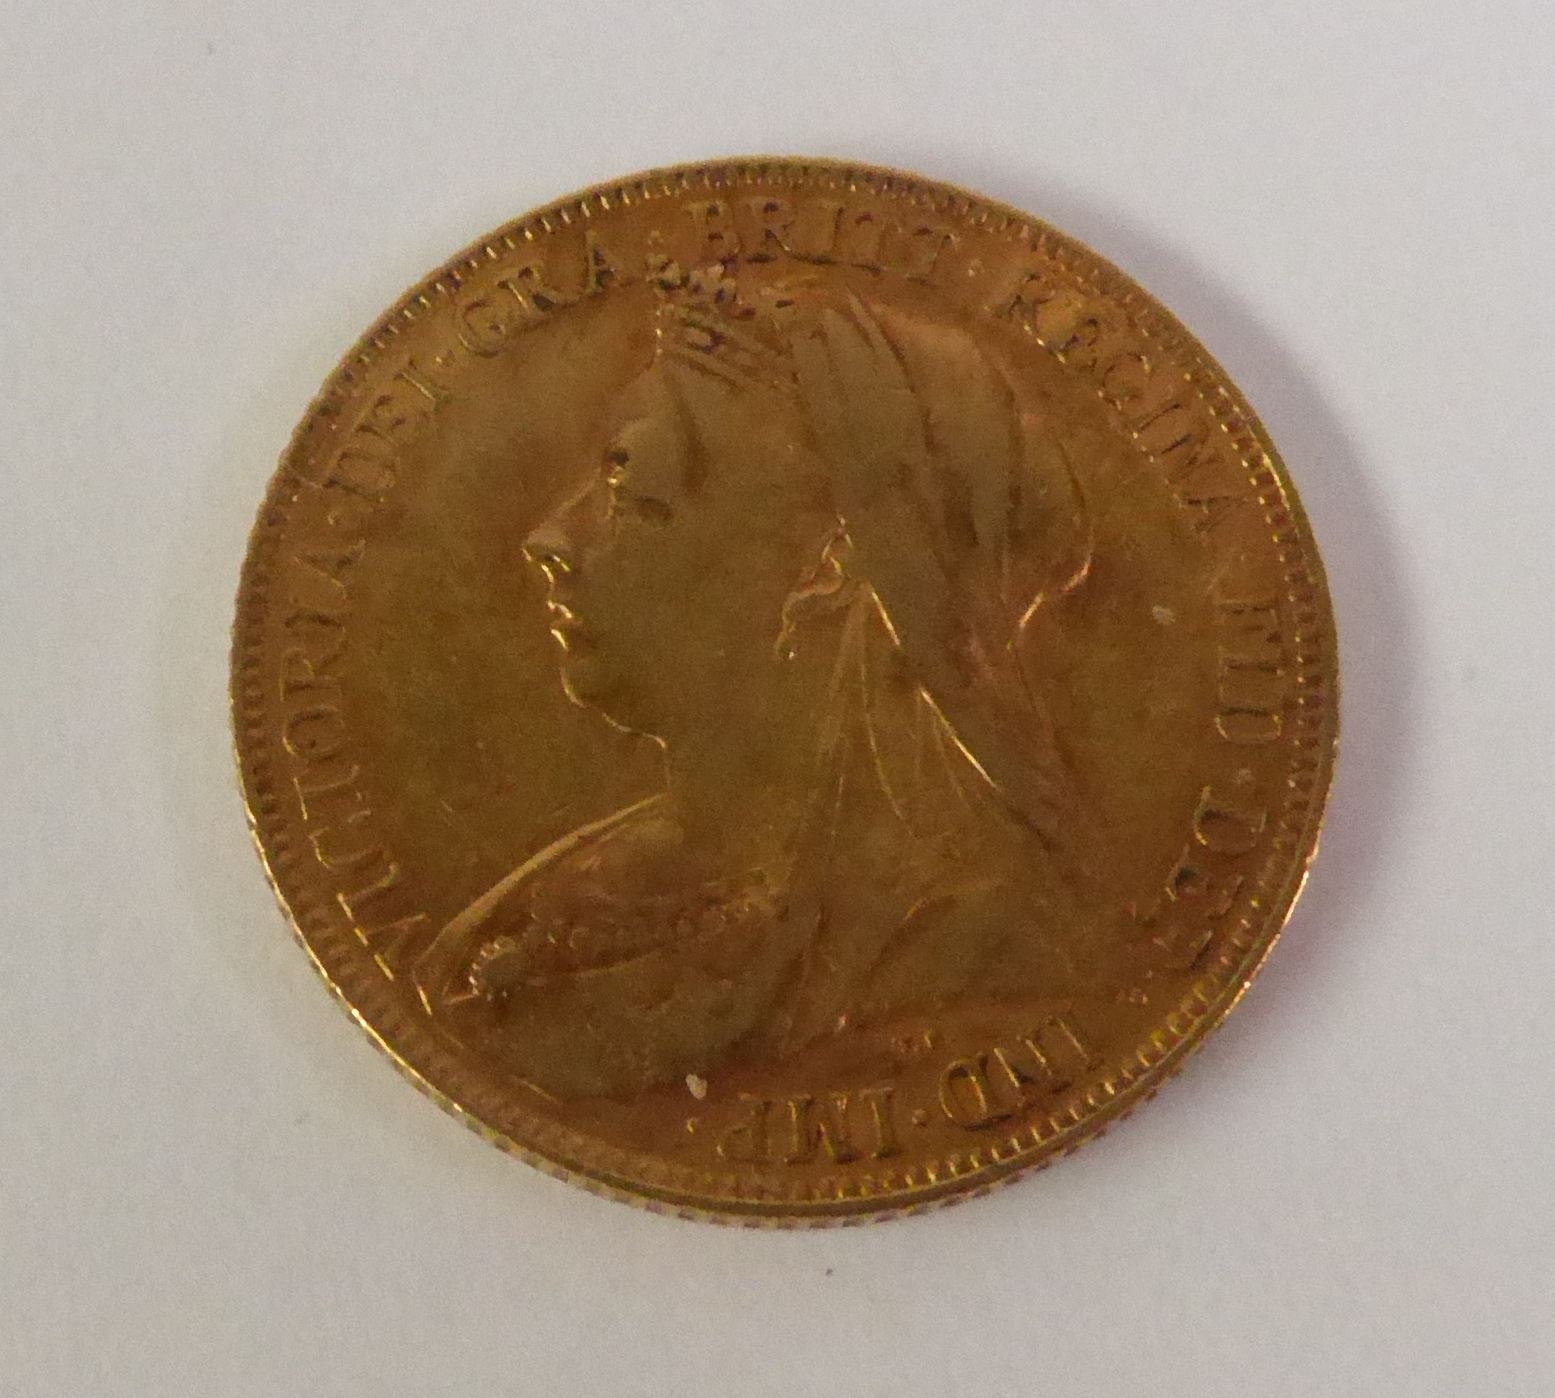 VICTORIA 1900 FULL SOVEREIGN - Image 2 of 2